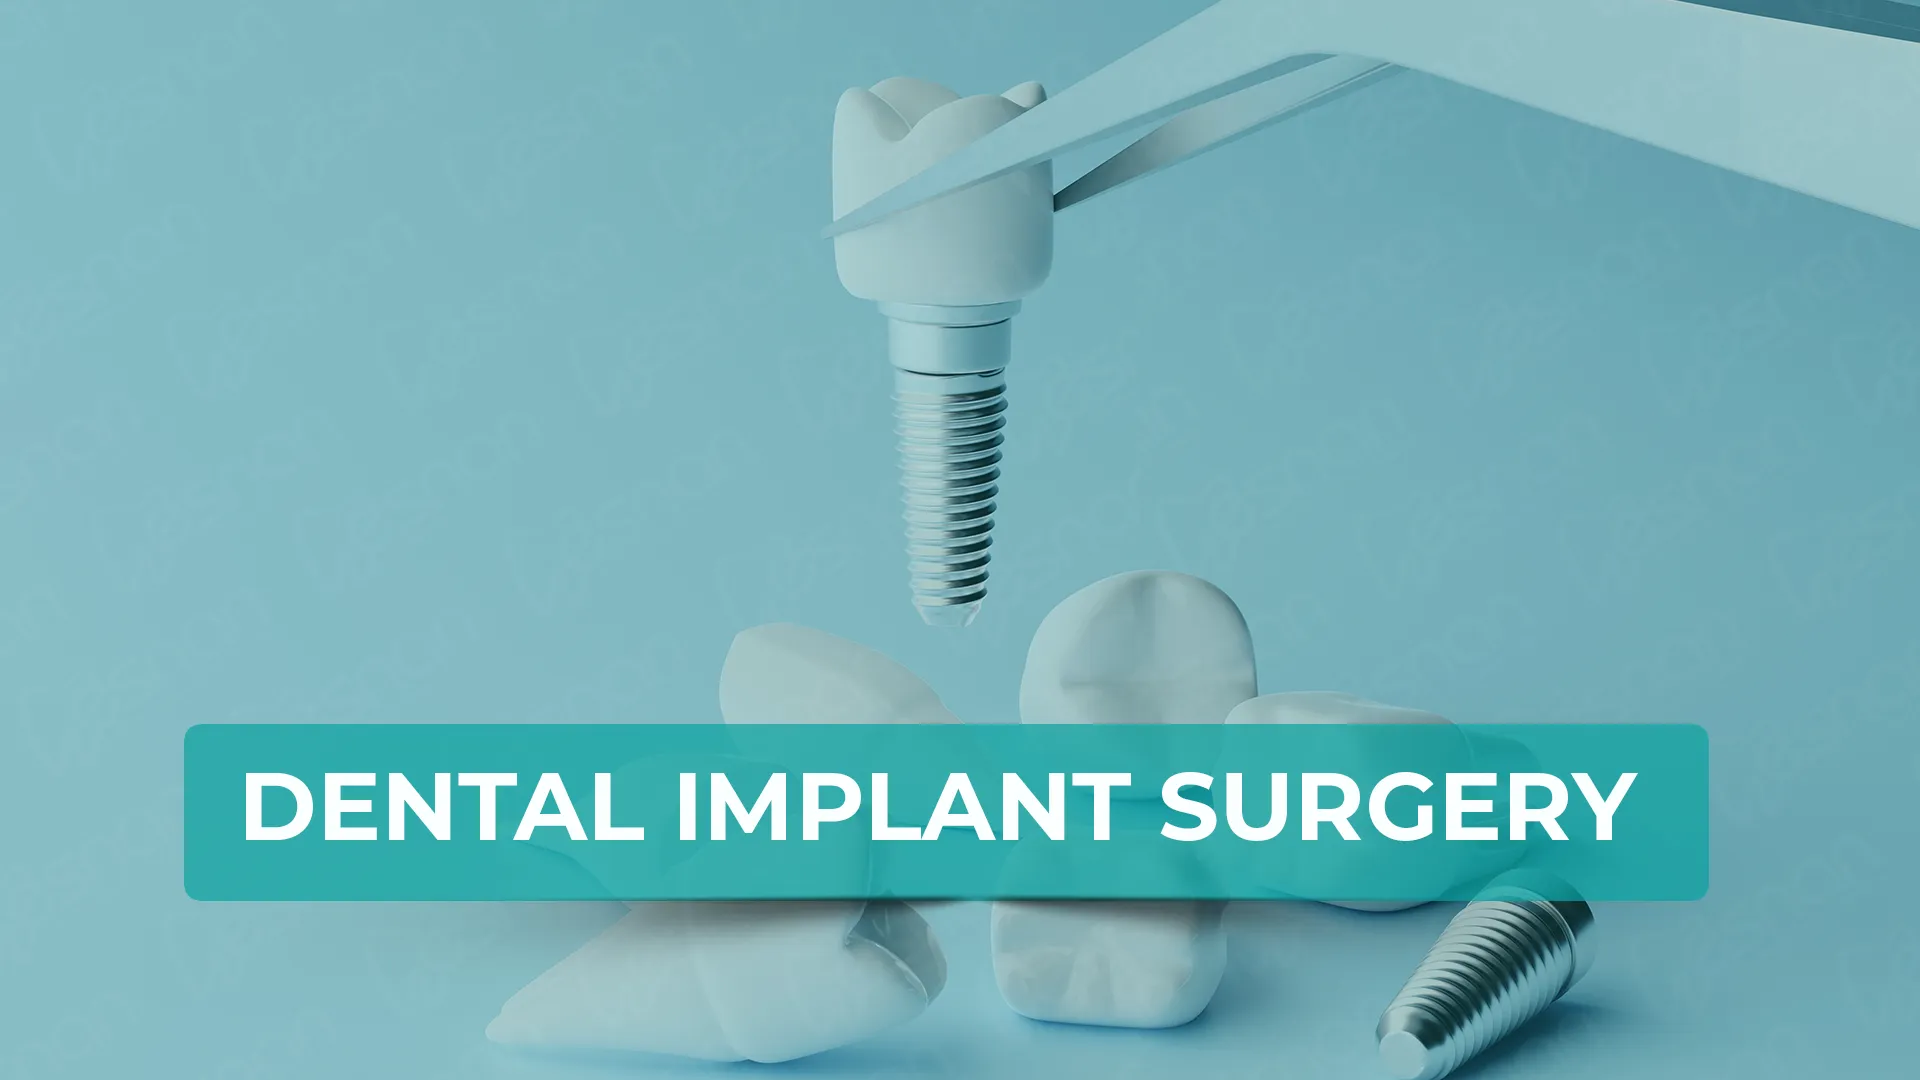 Get answers to your questions about dental implant surgery in Turkey. Explore procedures, costs, recovery, and why Turkey is a top destination for dental care.